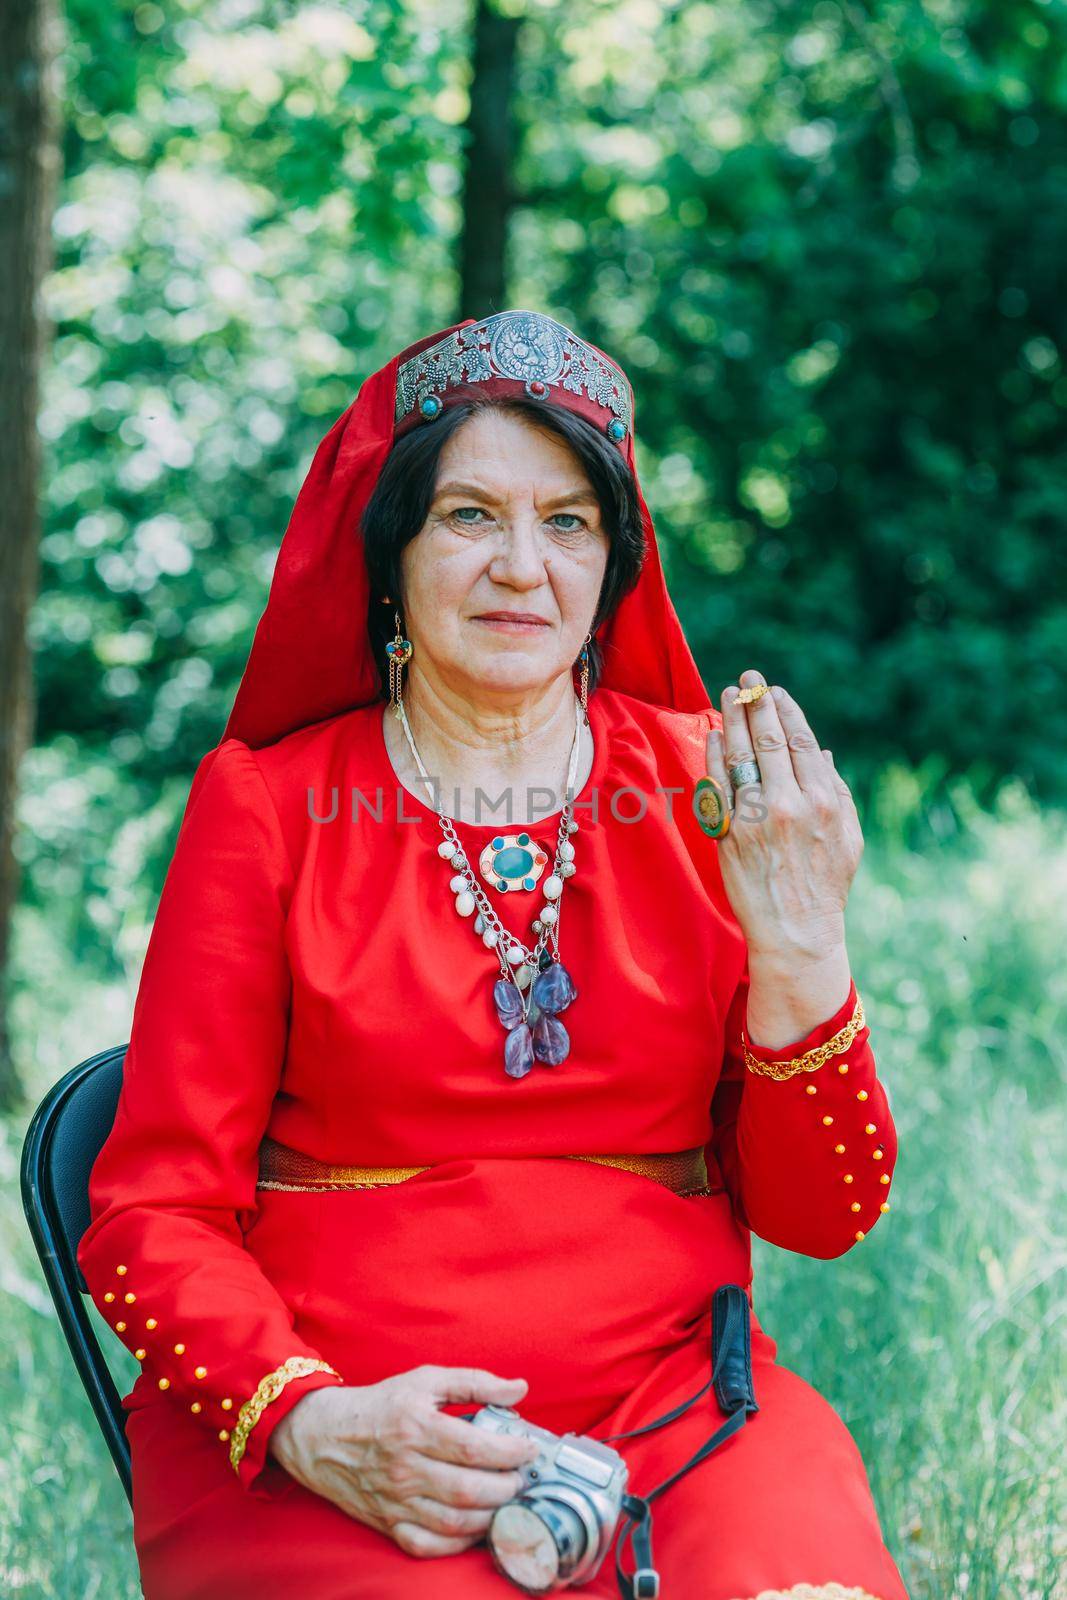 the senior priestess with a butterfly on her fingers prepared for the rite of sacrifice. mystical pagan rite. pagans today. by mosfet_ua